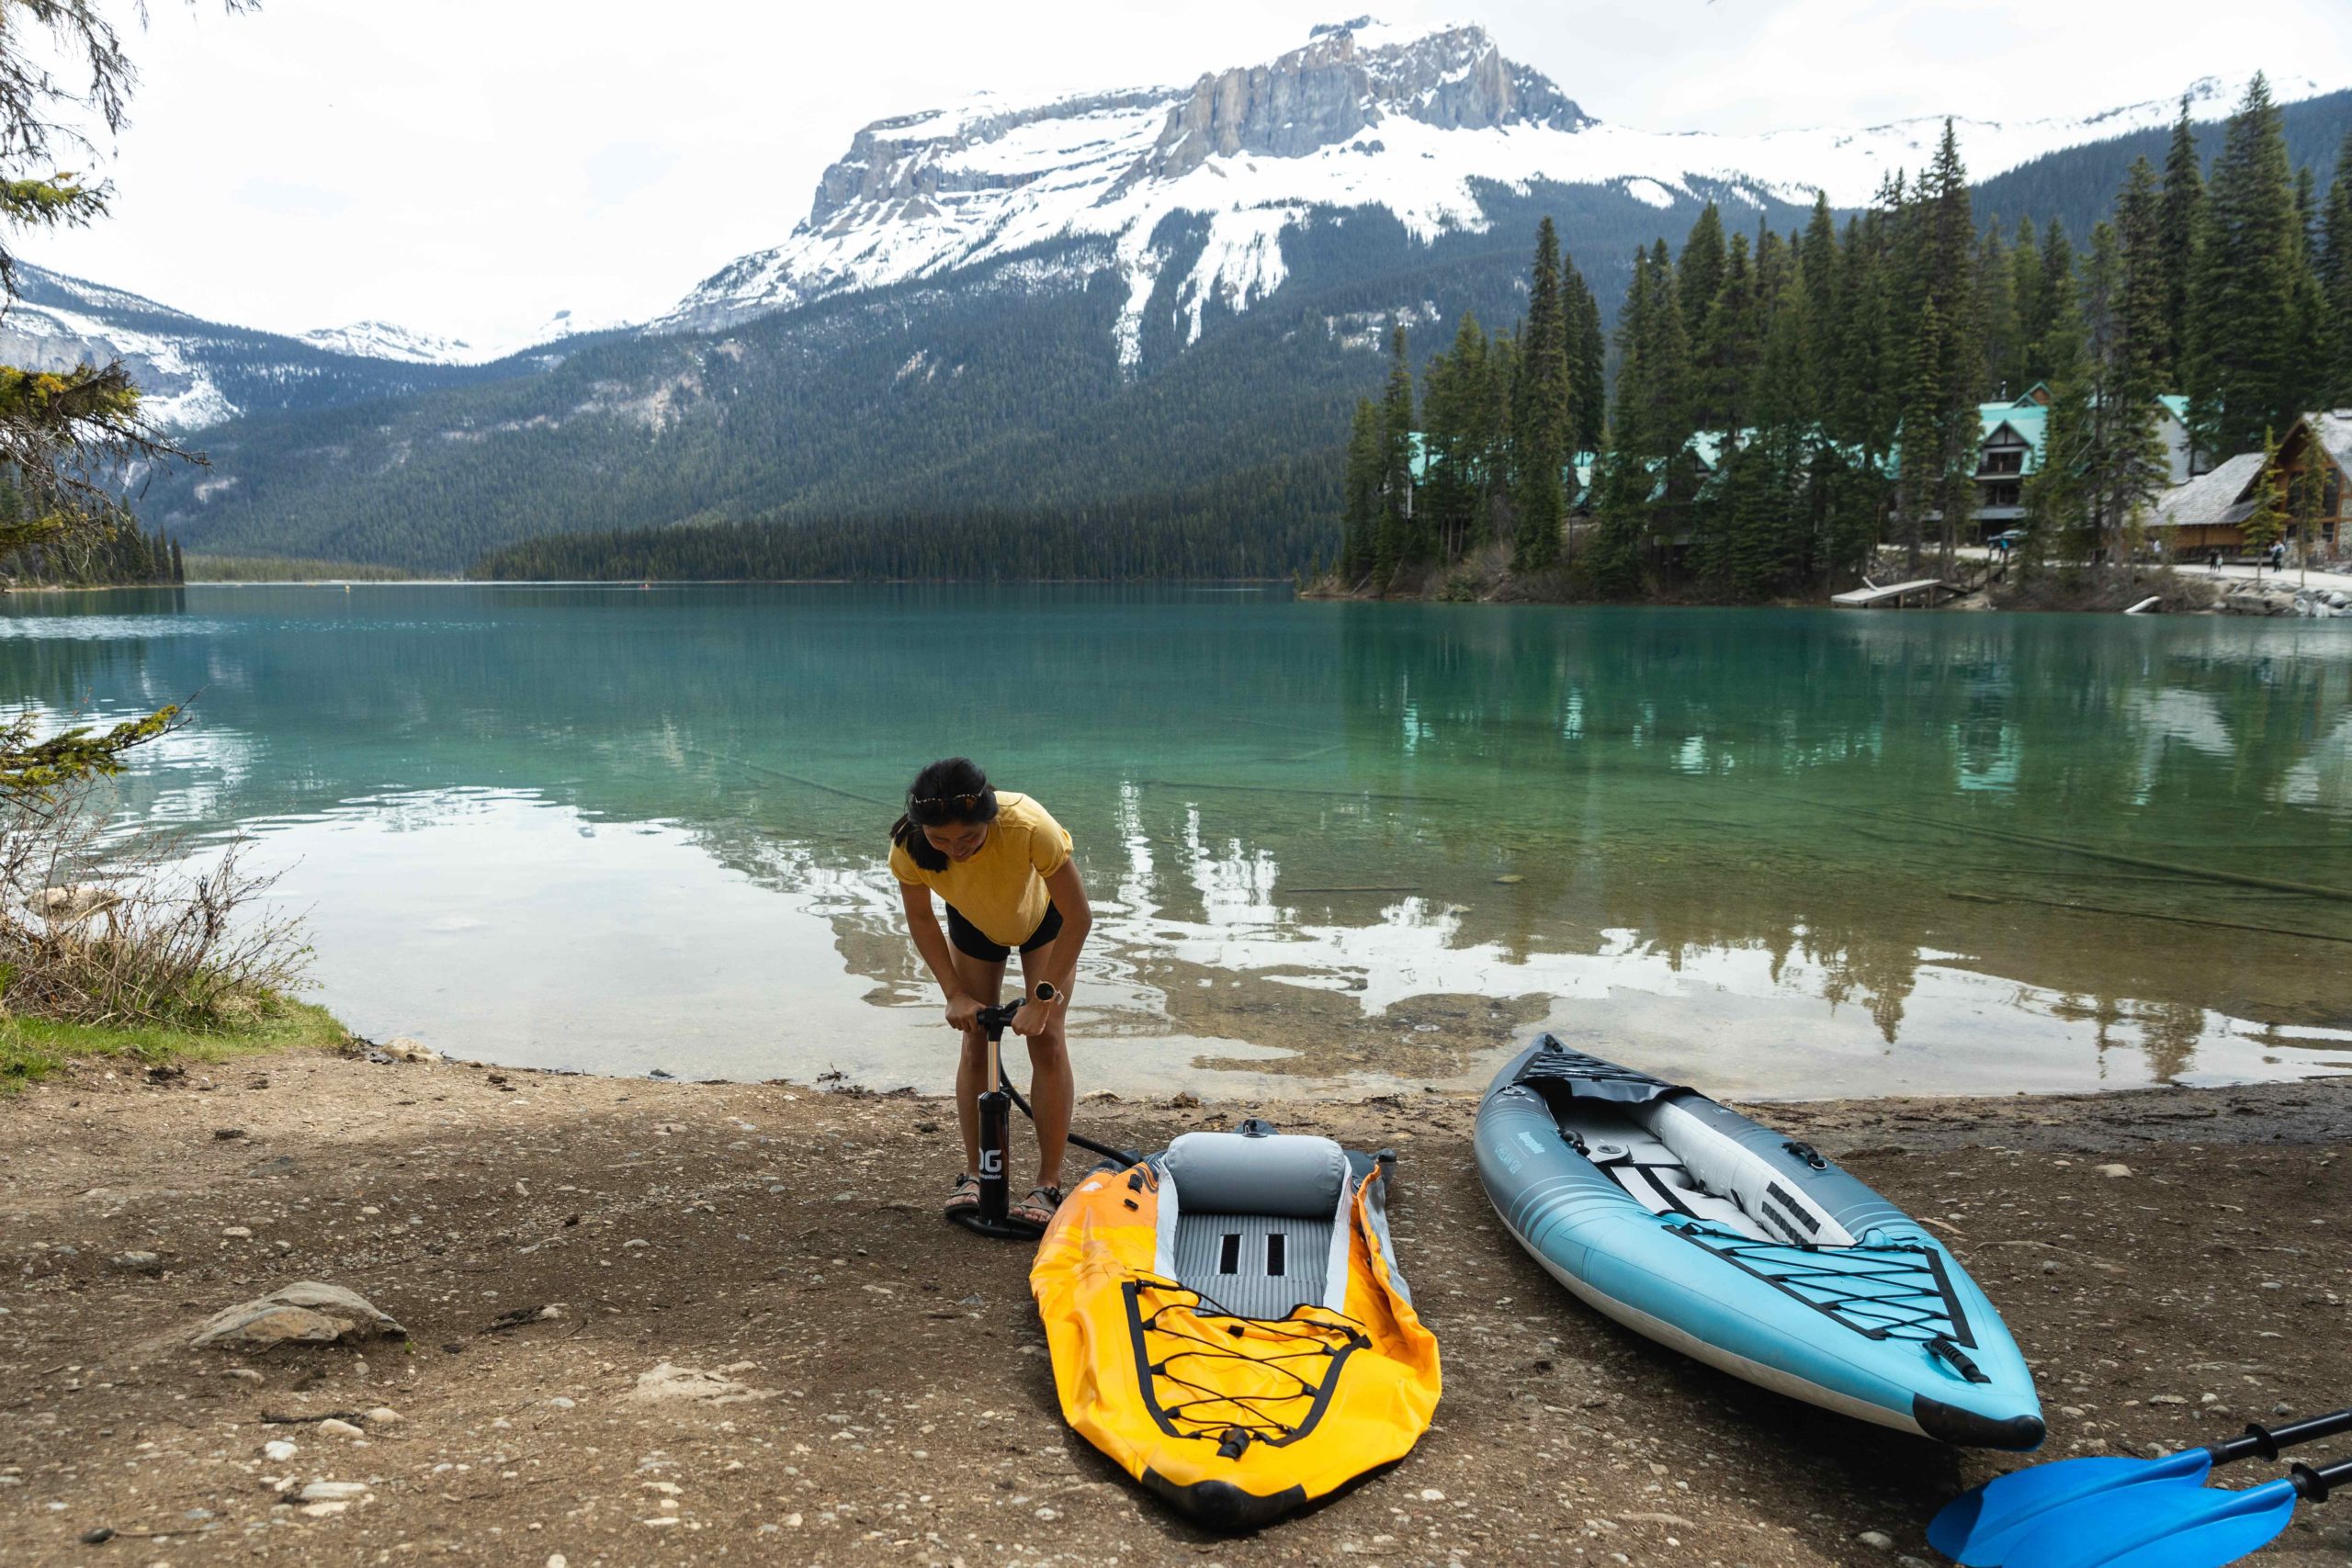 All Hail Inflatables: 9 Reasons Why Investing in an Inflatable Kayak or SUP is Worth It￼